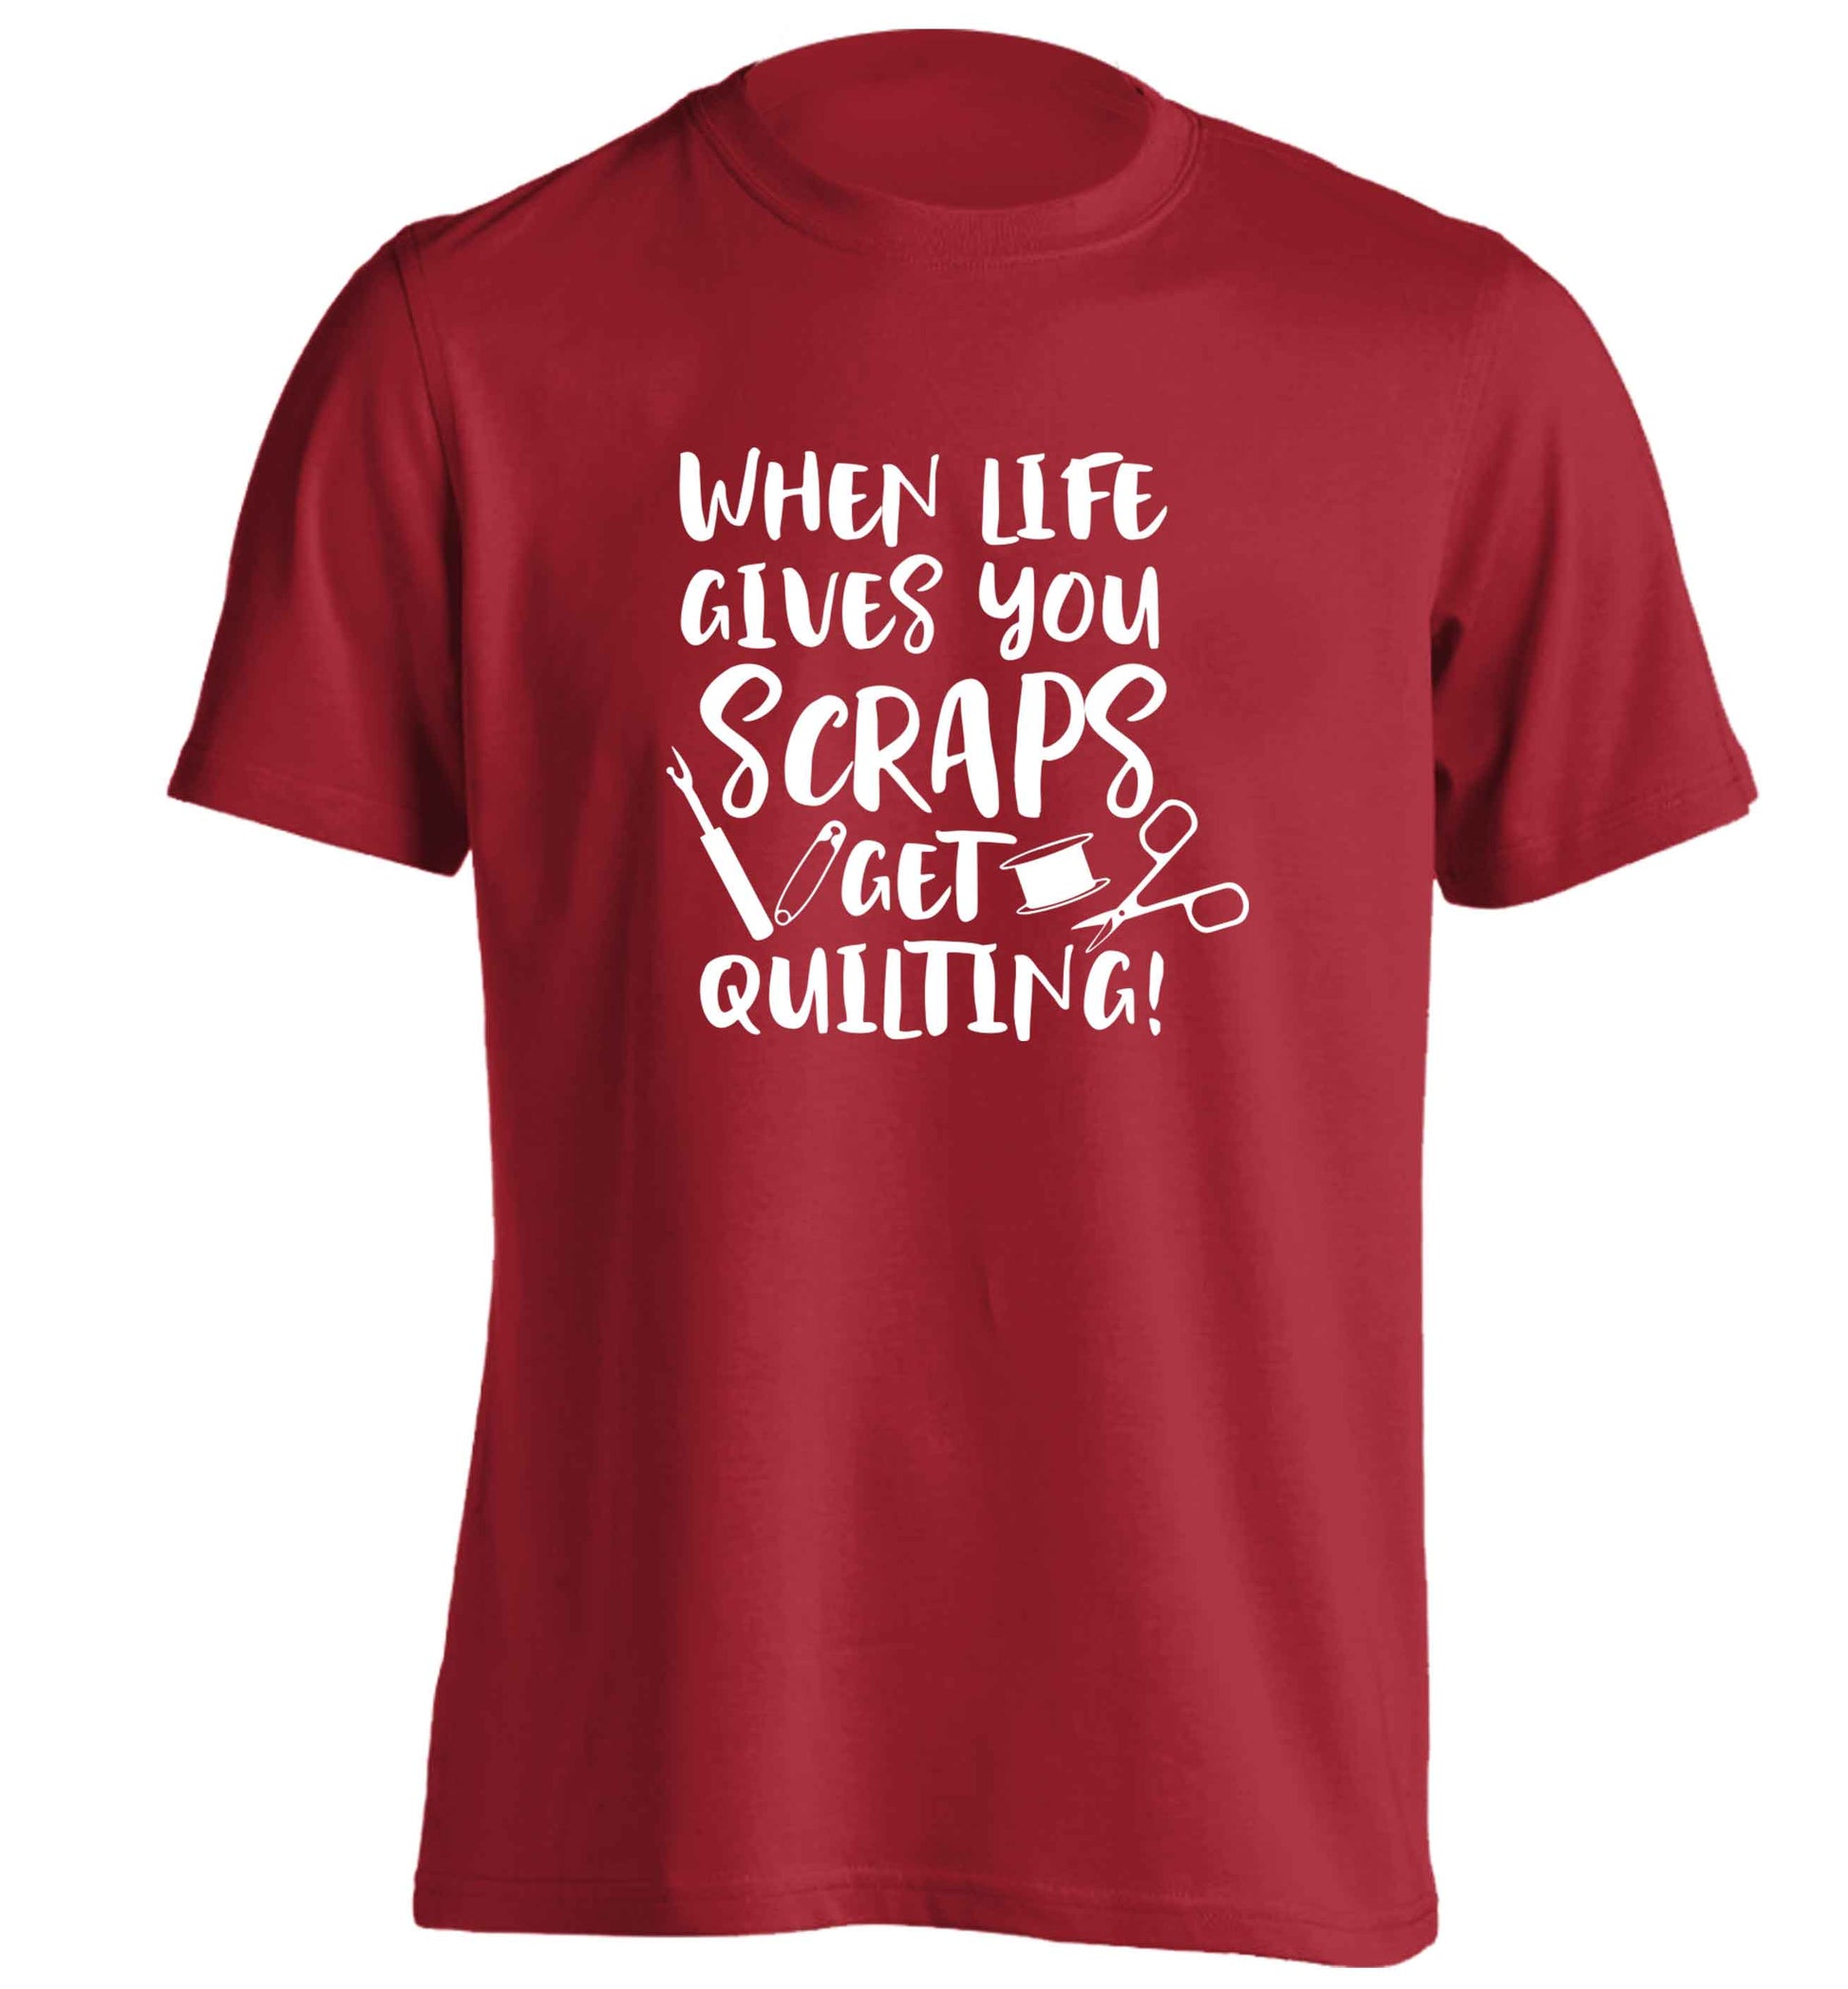 When life gives you scraps get quilting! adults unisex red Tshirt 2XL